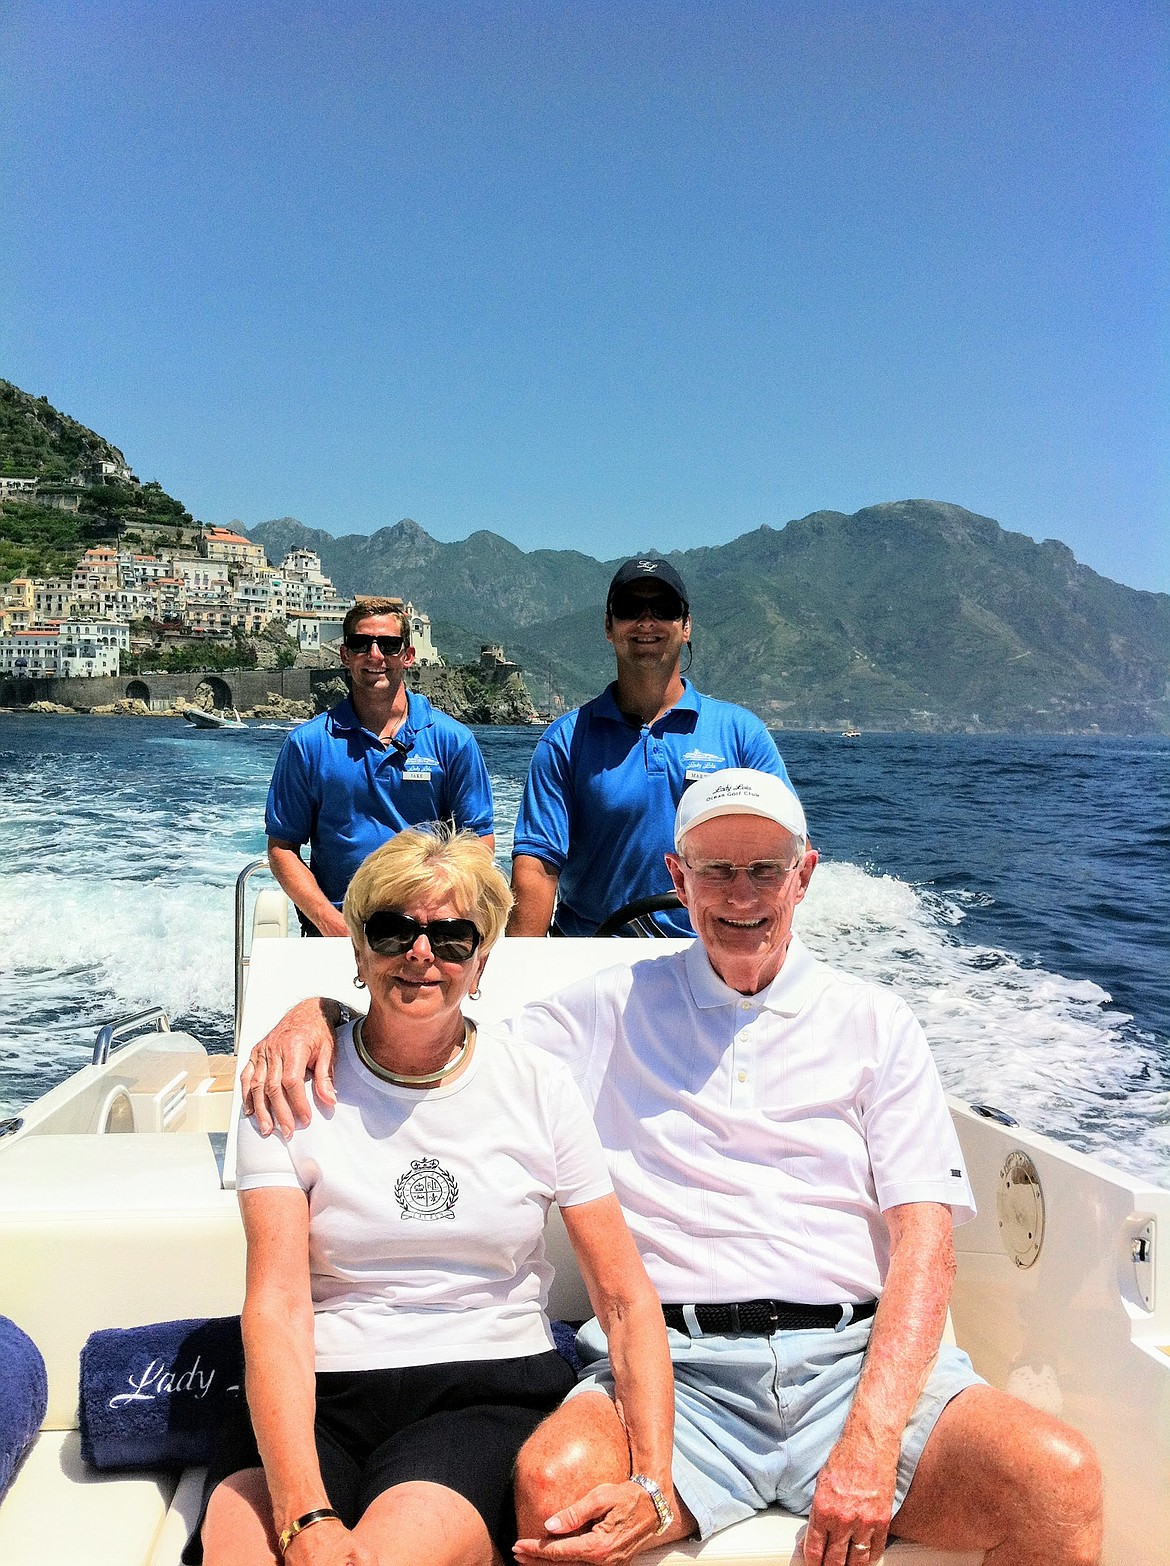 Lola and Duane relished their boating holidays in the Mediterranean sunshine.